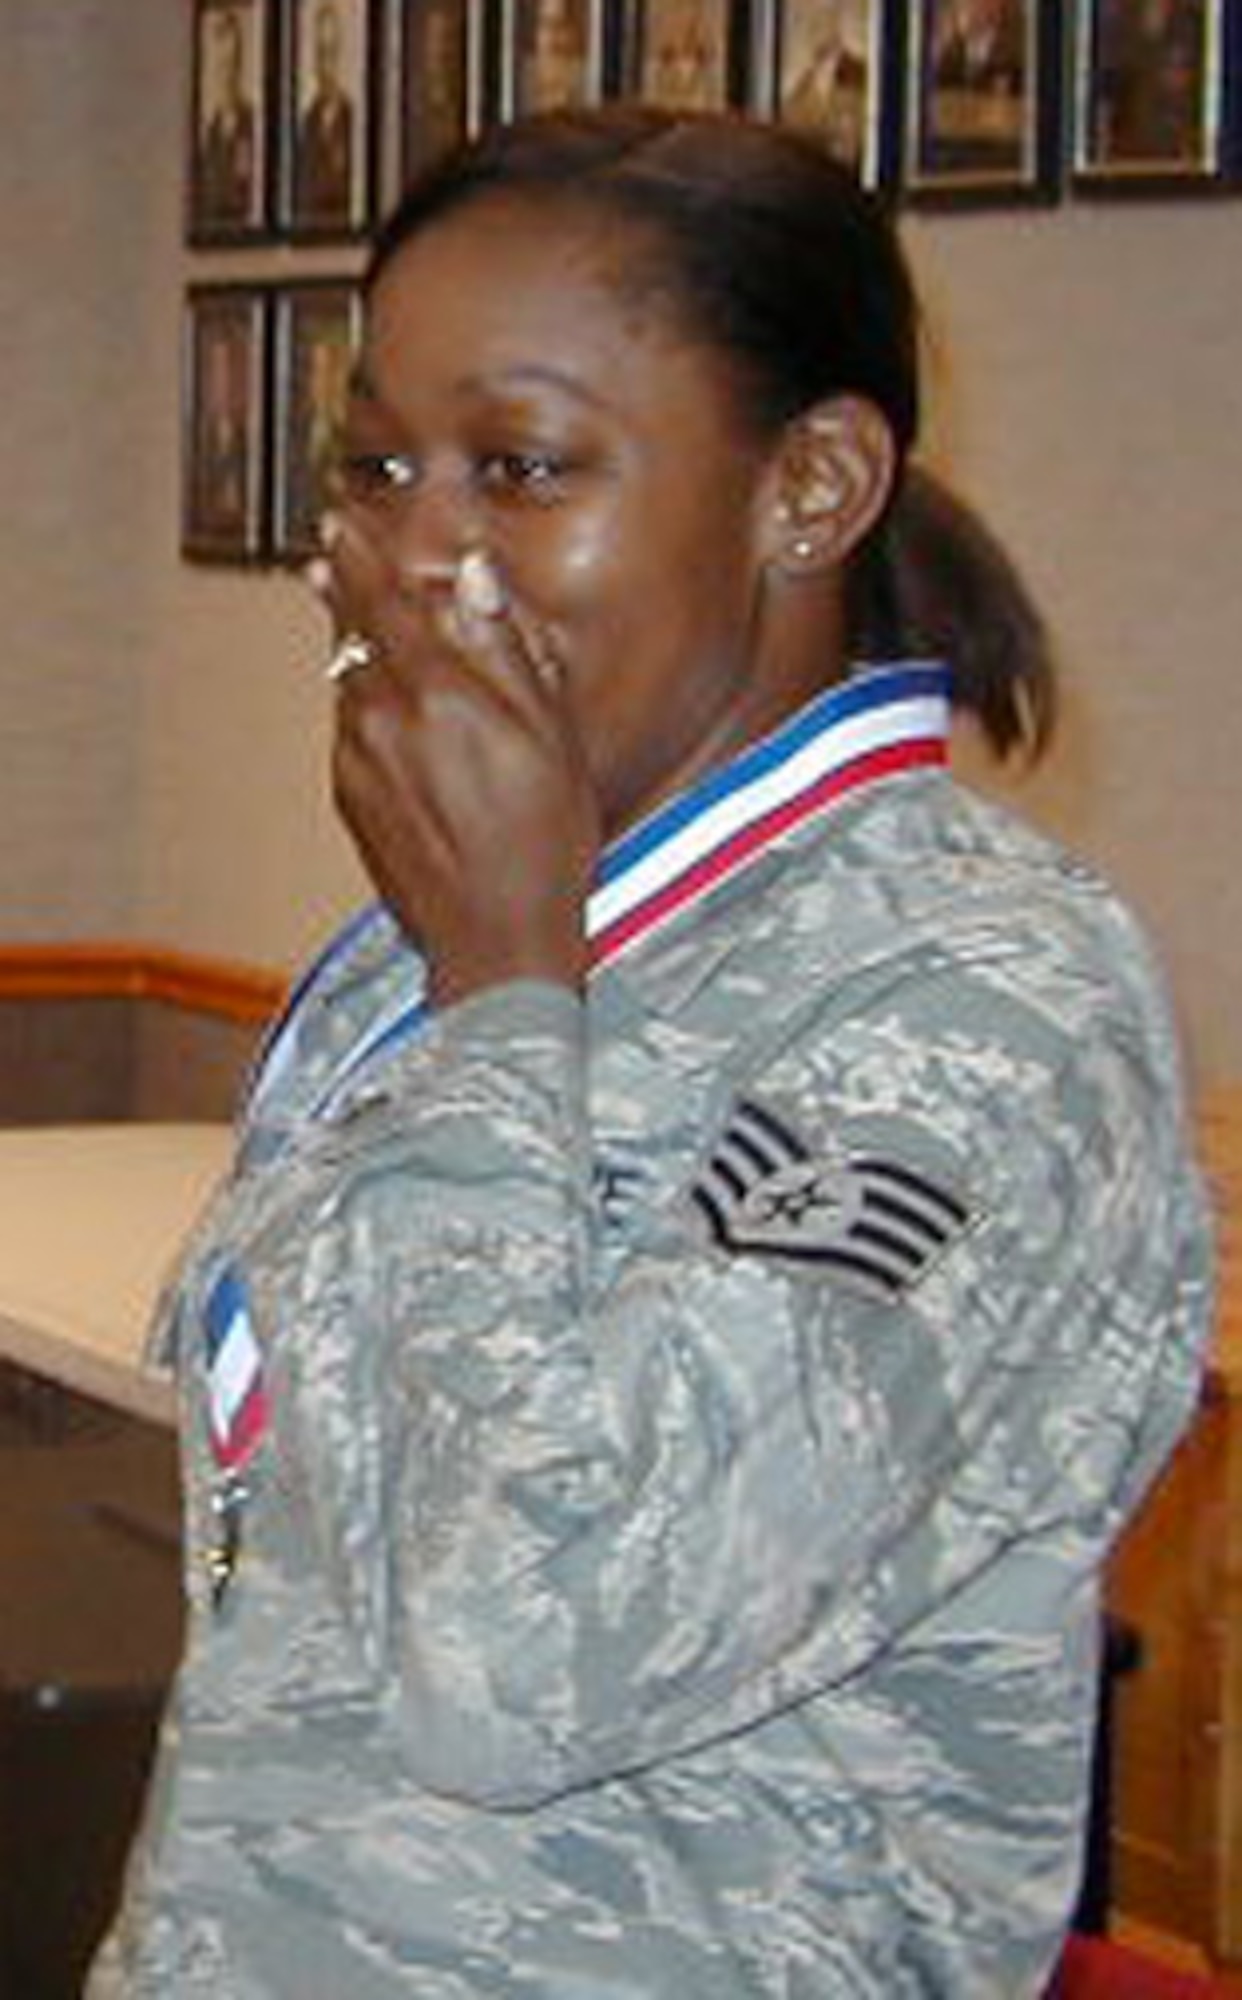 Newly promoted Tech. Sgt. Tanya Robinson, 29th Test Systems Squadron Det. 3, reacts to being told she has just been promoted via the Stripes for Exceptional Performers program Feb. 5 at Barksdale Air Force Base, La.  Less than a week after returning from a deployment, Sergeant Robinson was attending a commander's call when she was informed of the news.  Her commander, Lt. Col. Tom Silvia, Det. 3 commander, said the promotion was richly deserved.
“Tech. Sgt. Tanya Robinson is the most dedicated NCO I've had the privilege of working with in my 19 years of service," he said.  "She achieved this promotion because her duty performance is simply astounding.  She is the type of NCO our Air Force needs to continue to be the best in the world.” 
U.S. Air Force photo.